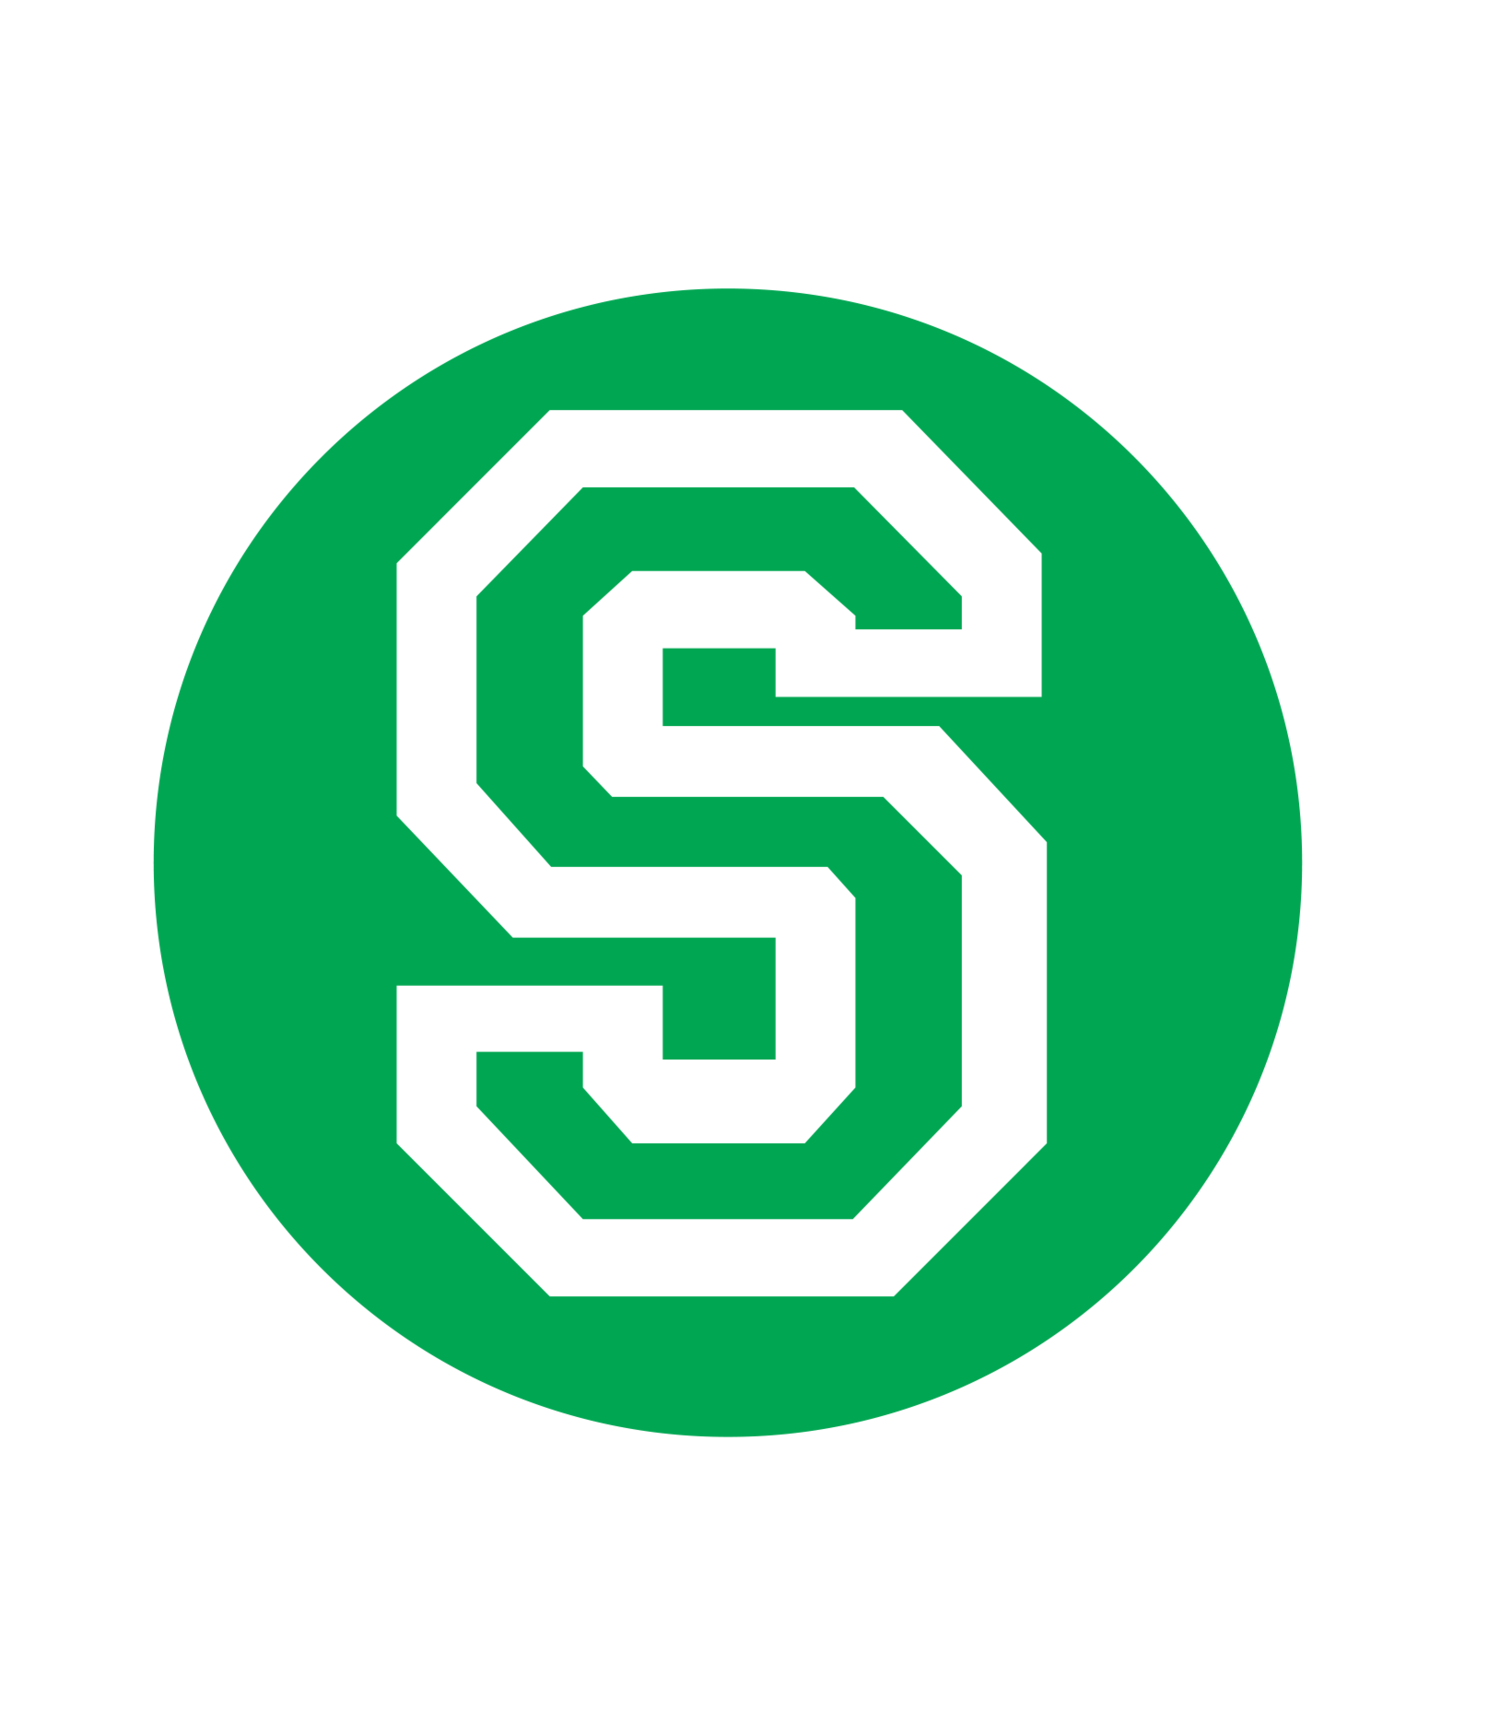 Sutton Athletic Booster Club